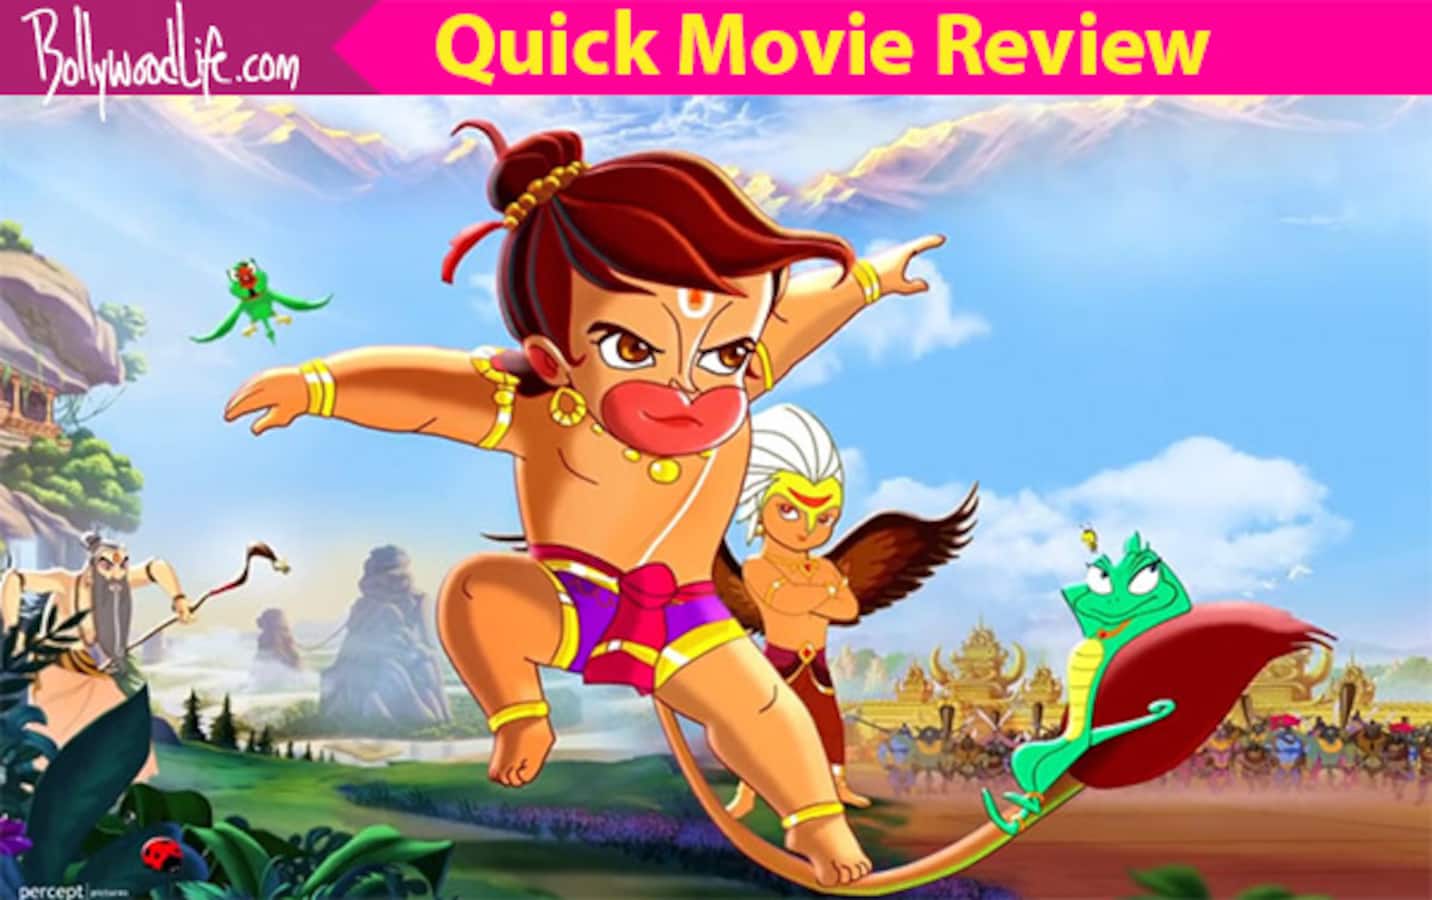 Hanuman Da Damdaar quick movie review: Jokes on fart, gays and  over-exaggerated South Indian accent sum up the first half of this passable  animation flick - Bollywood News & Gossip, Movie Reviews,